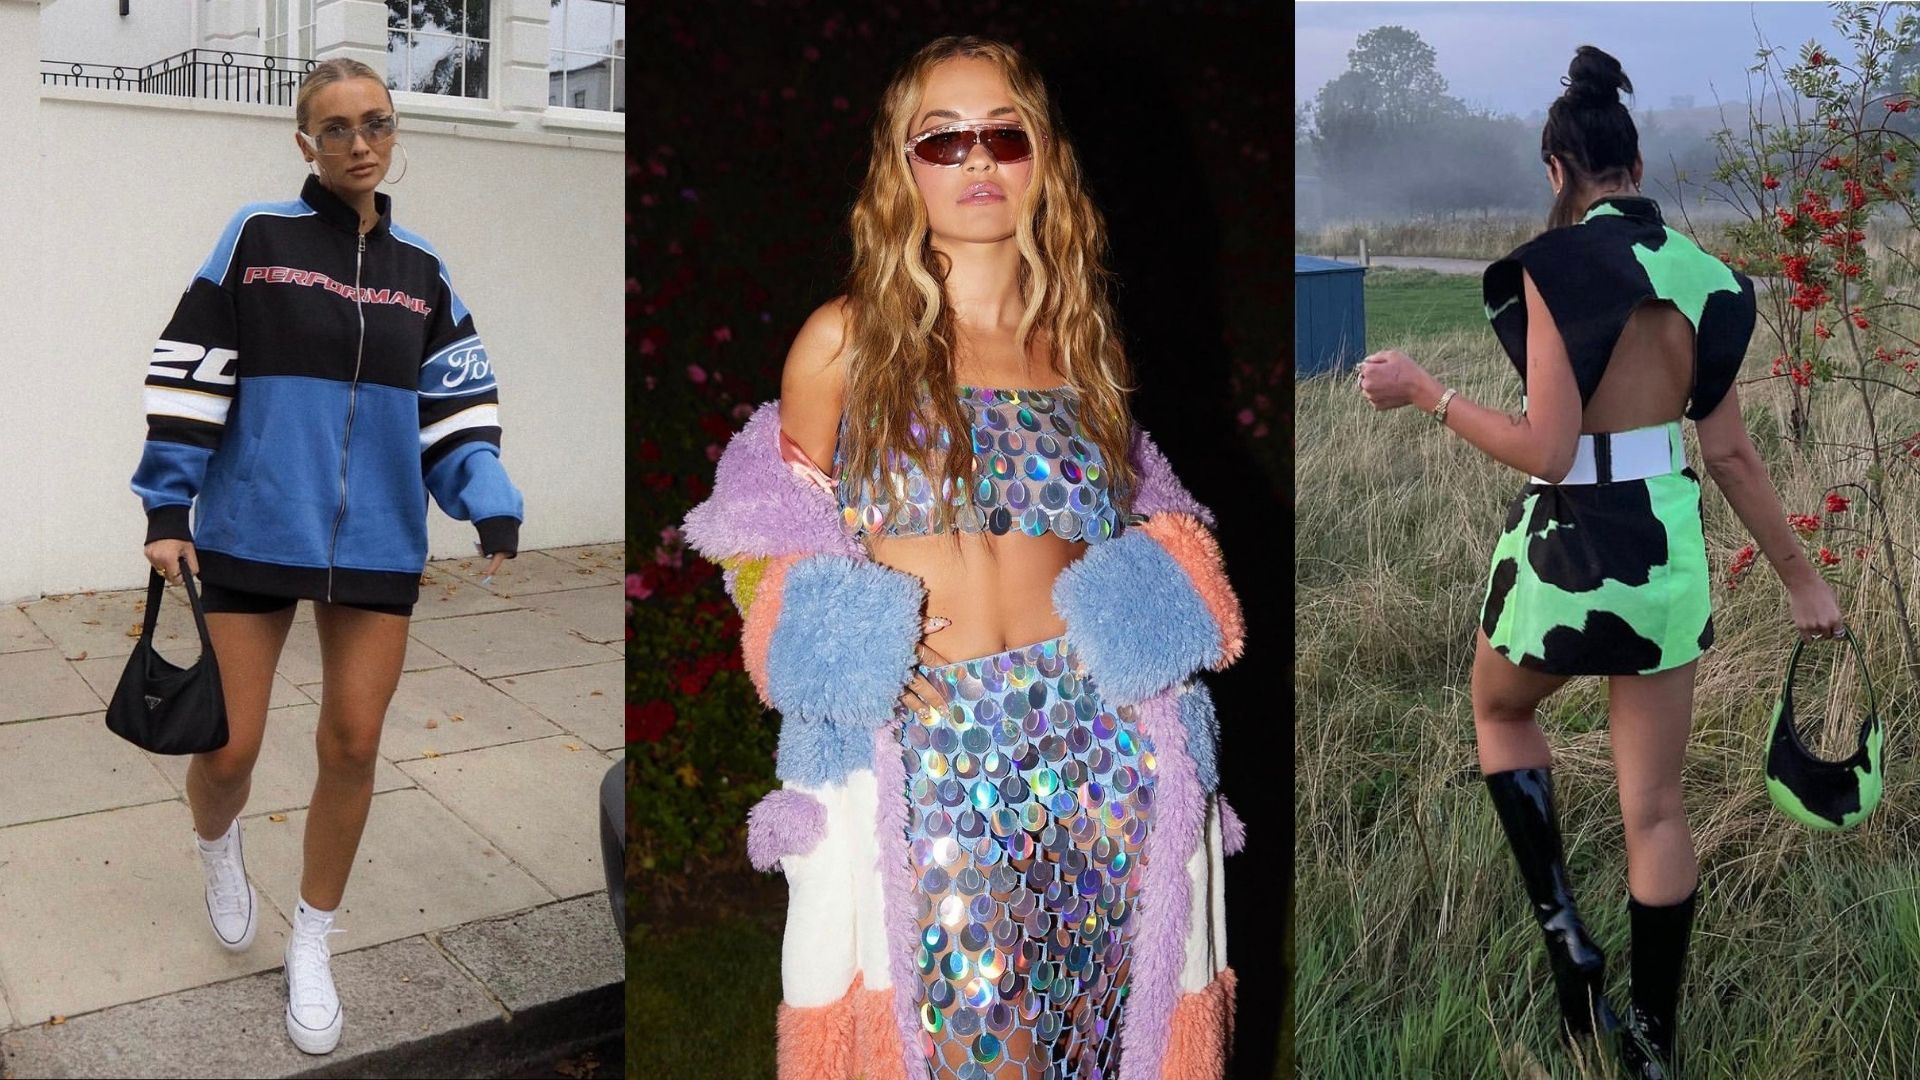 Best Dressed August 25th From Rita Ora, Saweetie And More